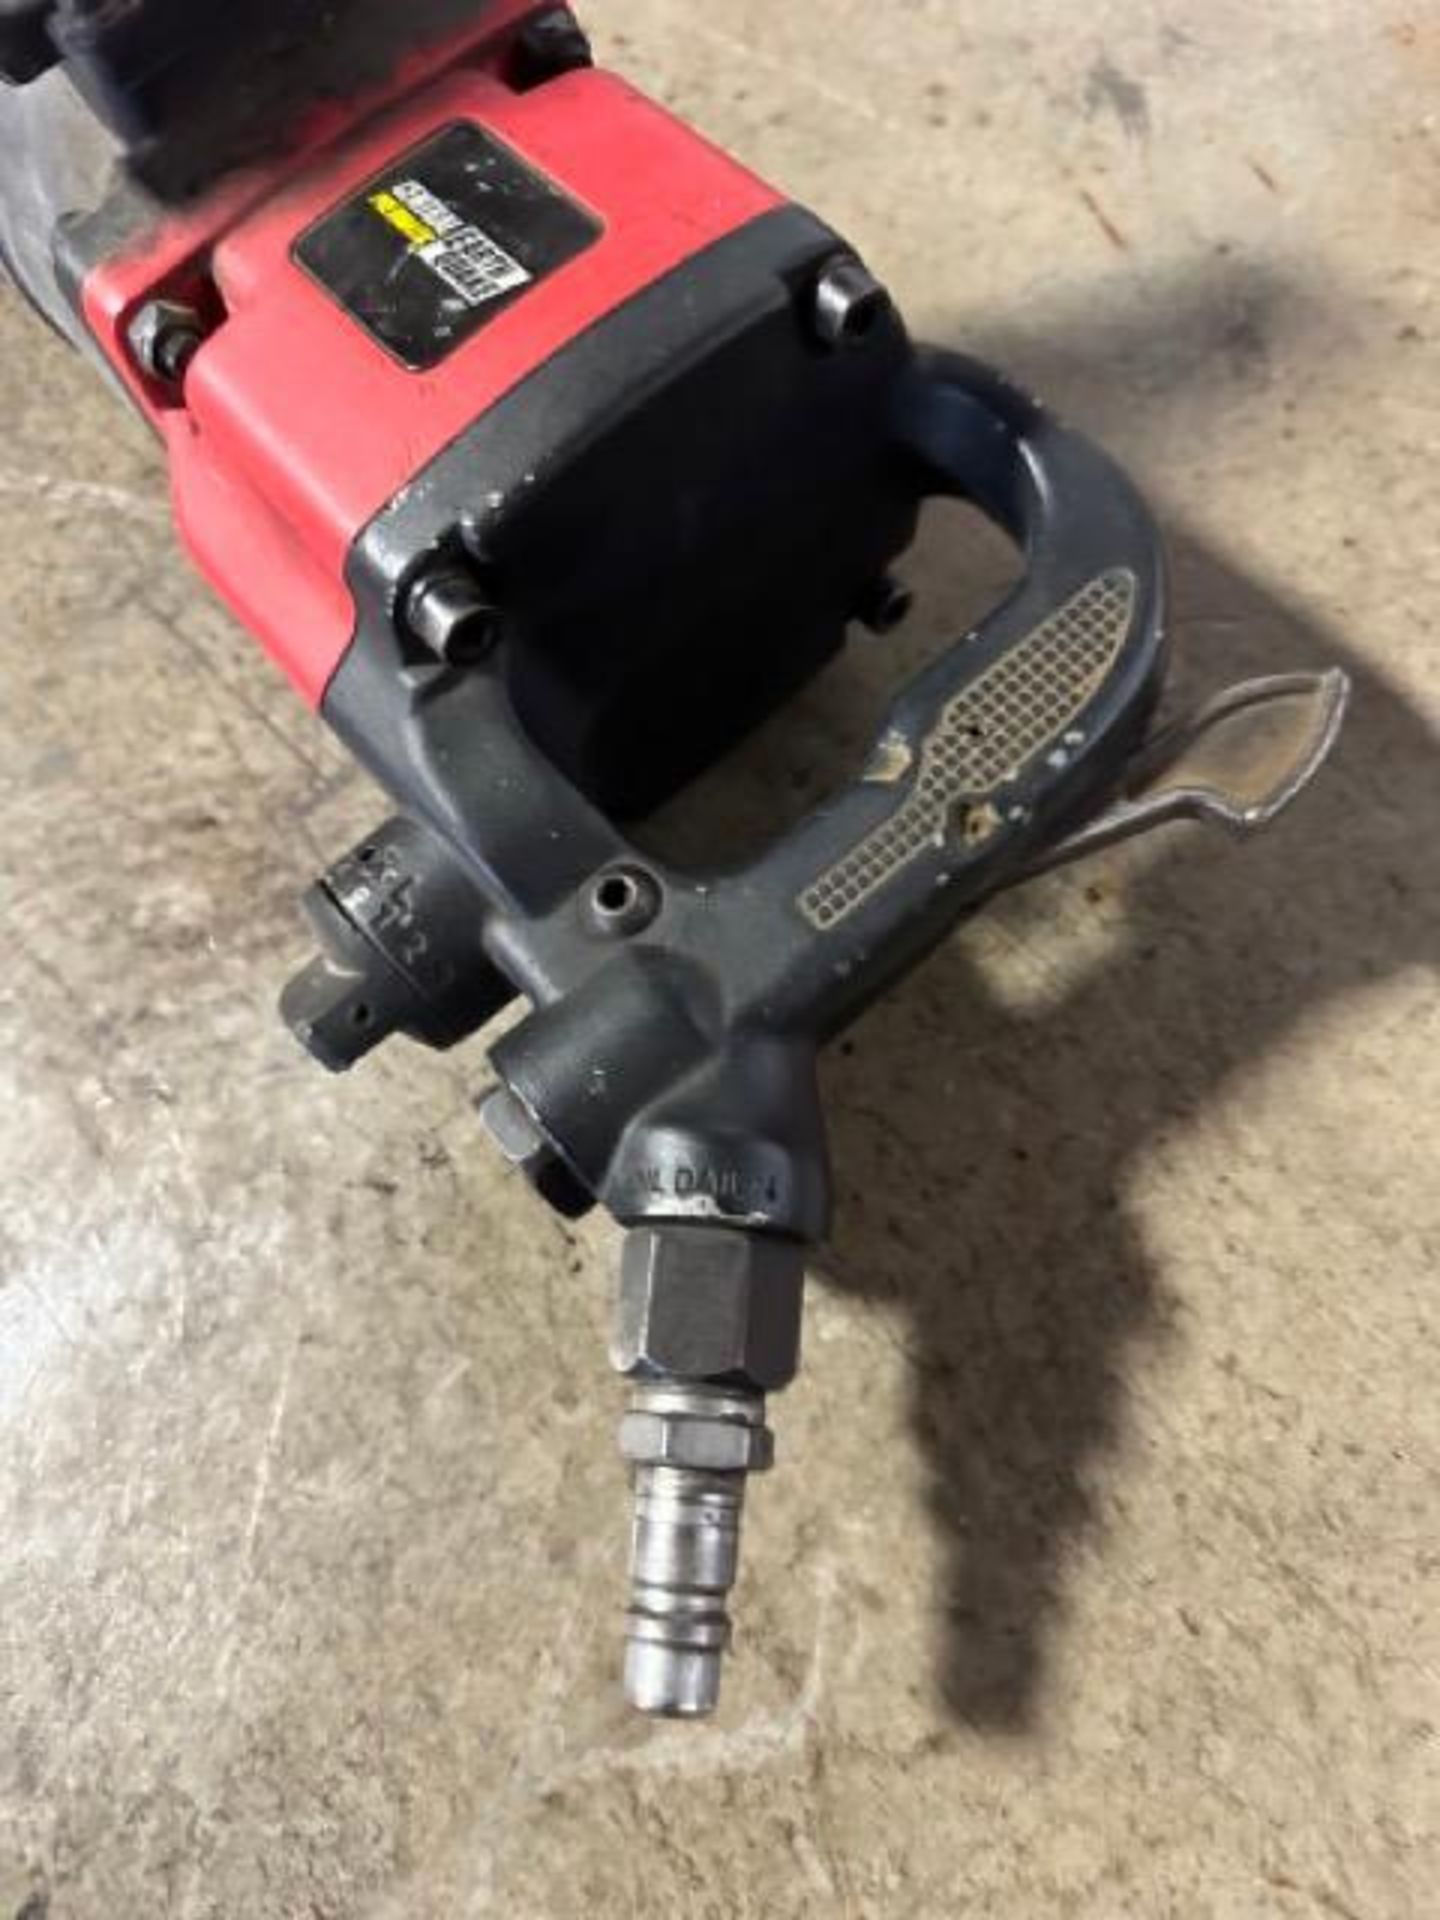 Earthquake 1" Air impact wrench - Image 4 of 4